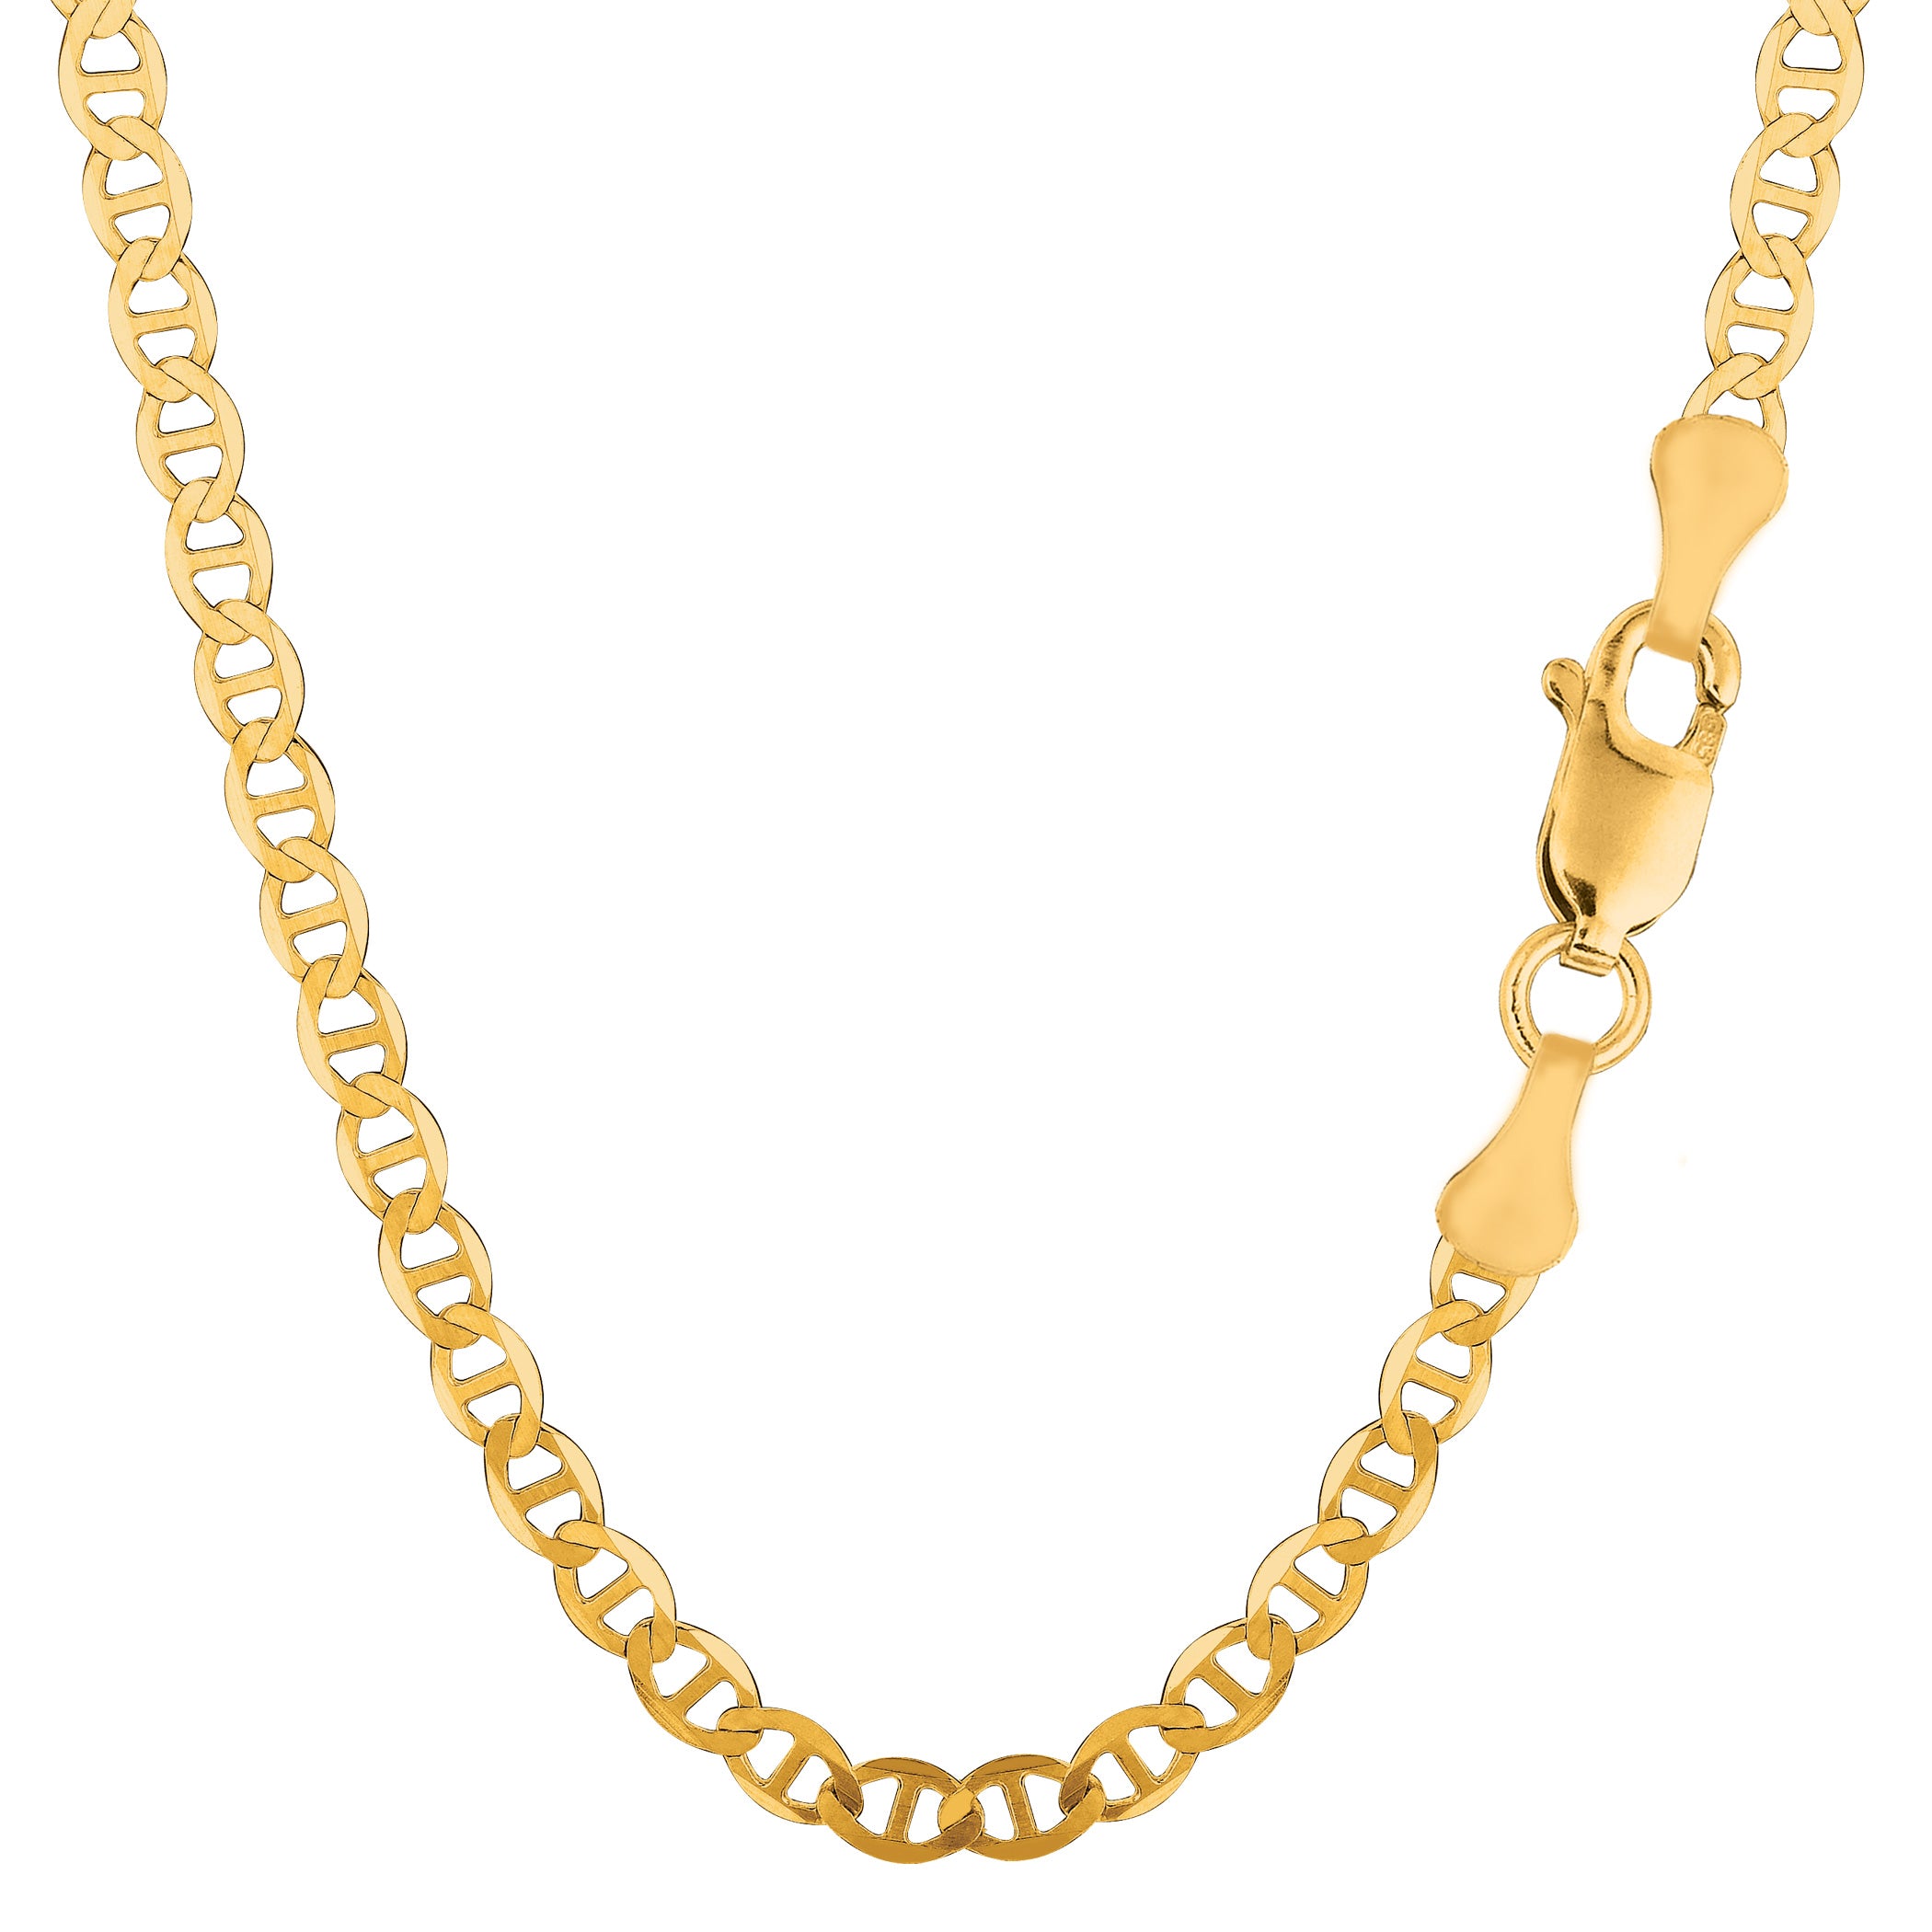 14k Yellow Gold Mariner Link Chain Necklace, 4.5 mm fine designer jewelry for men and women